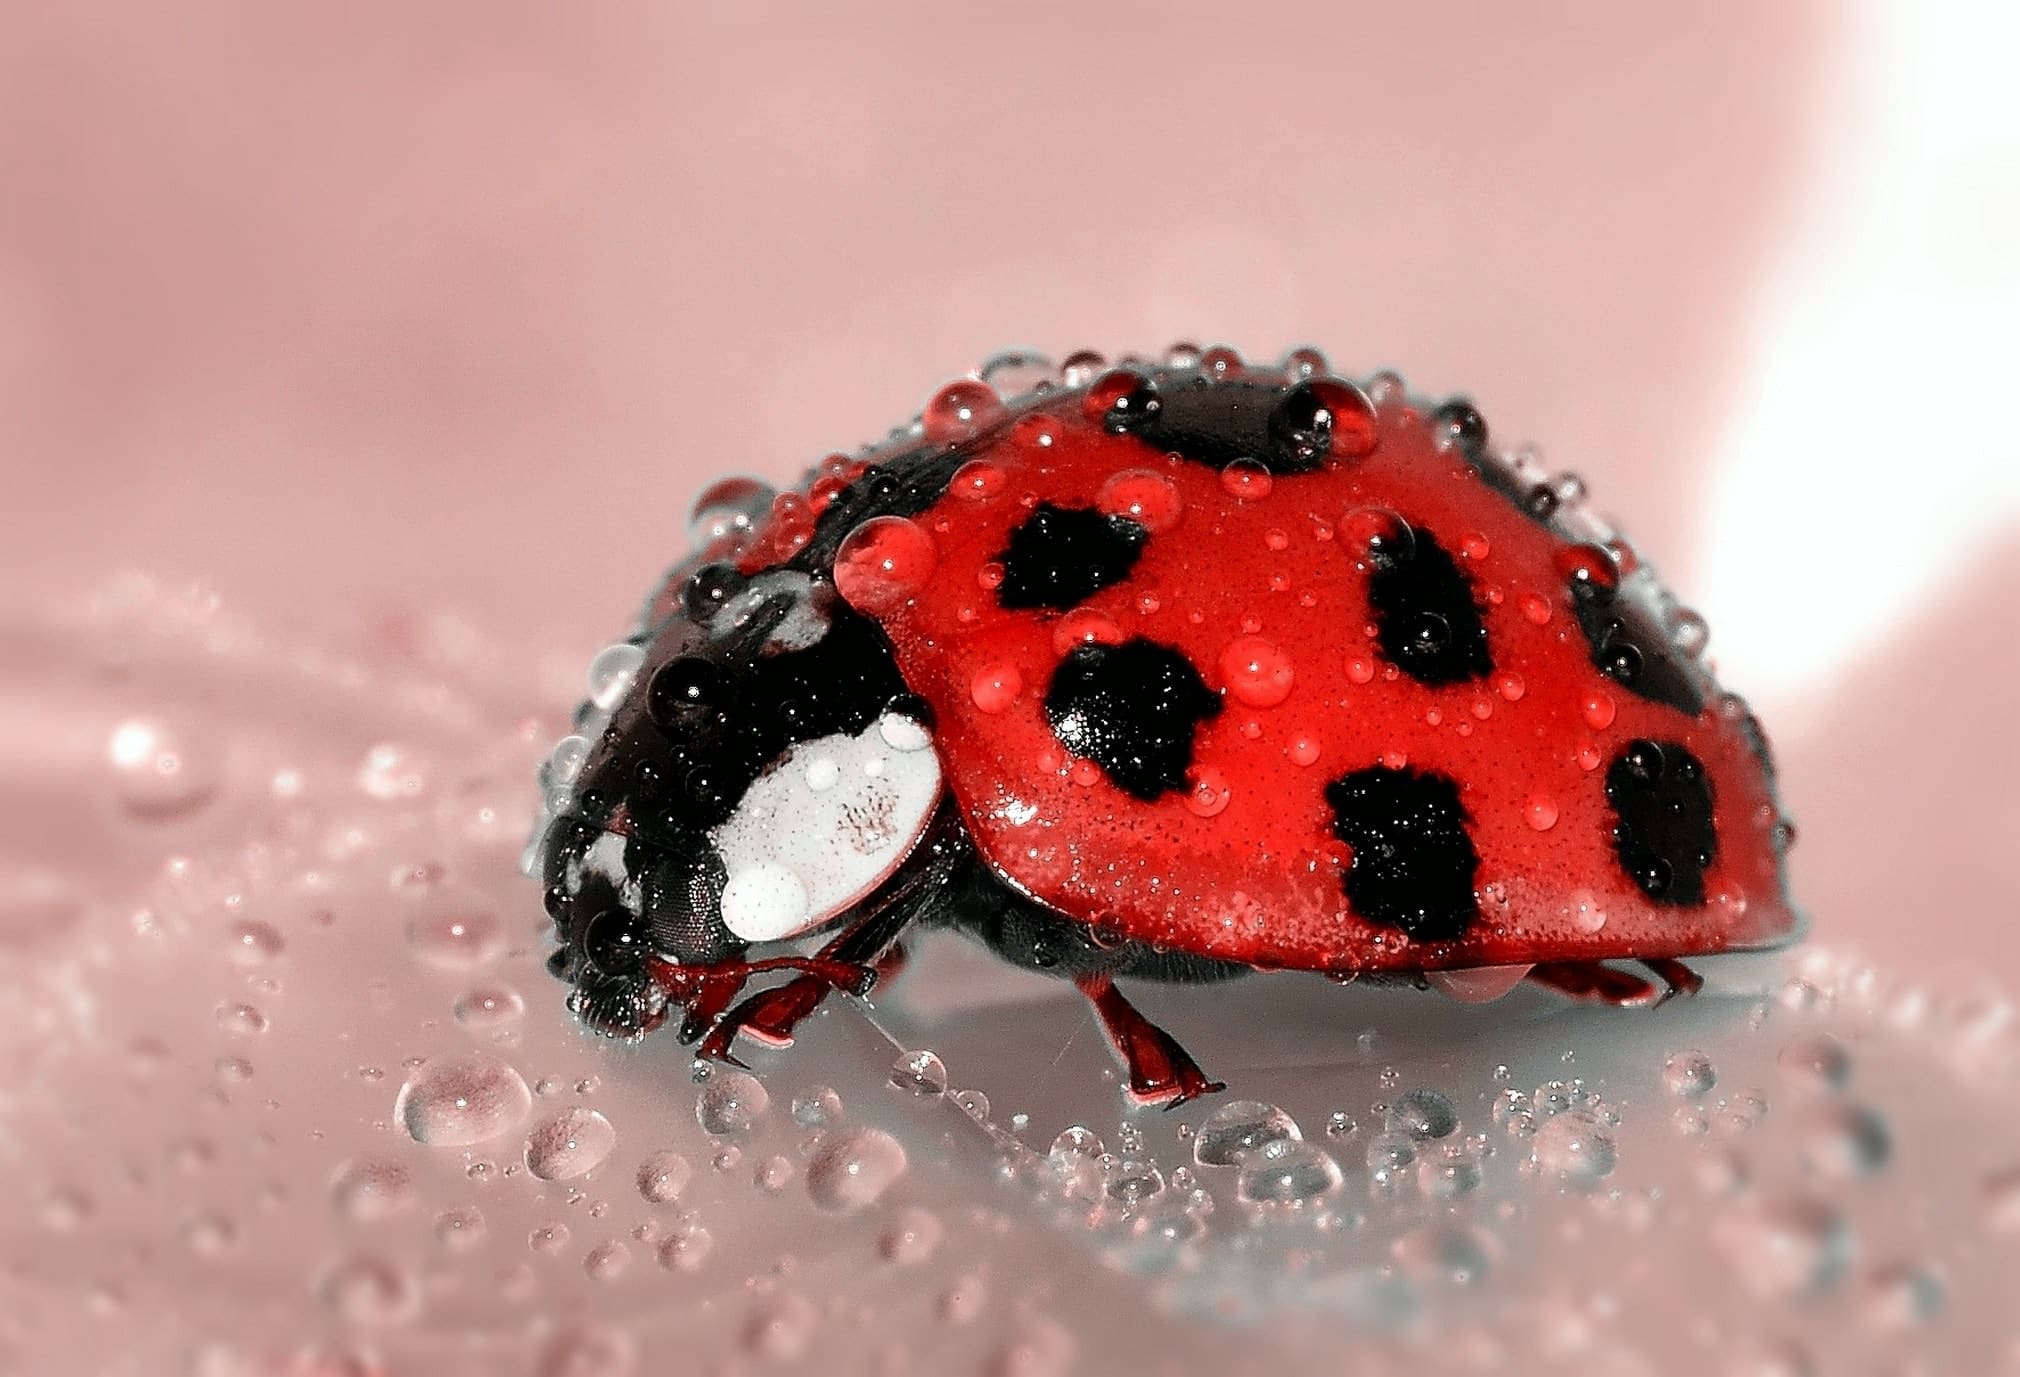 The Story of the Ladybug in the Bathtub